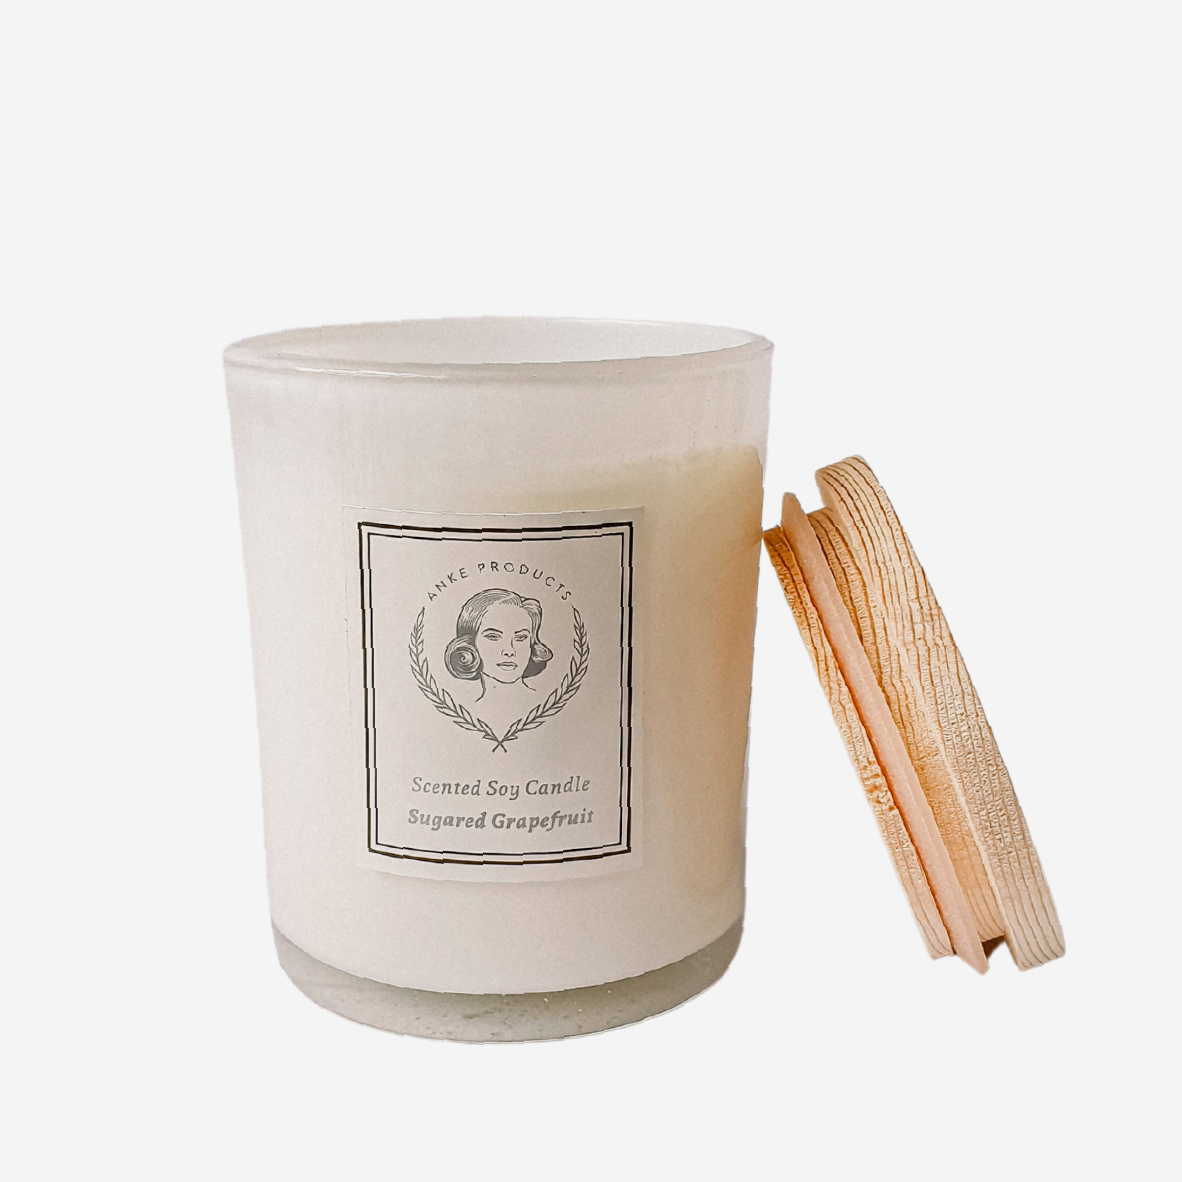 Scented Soy Candle - Sugared Grapefruit